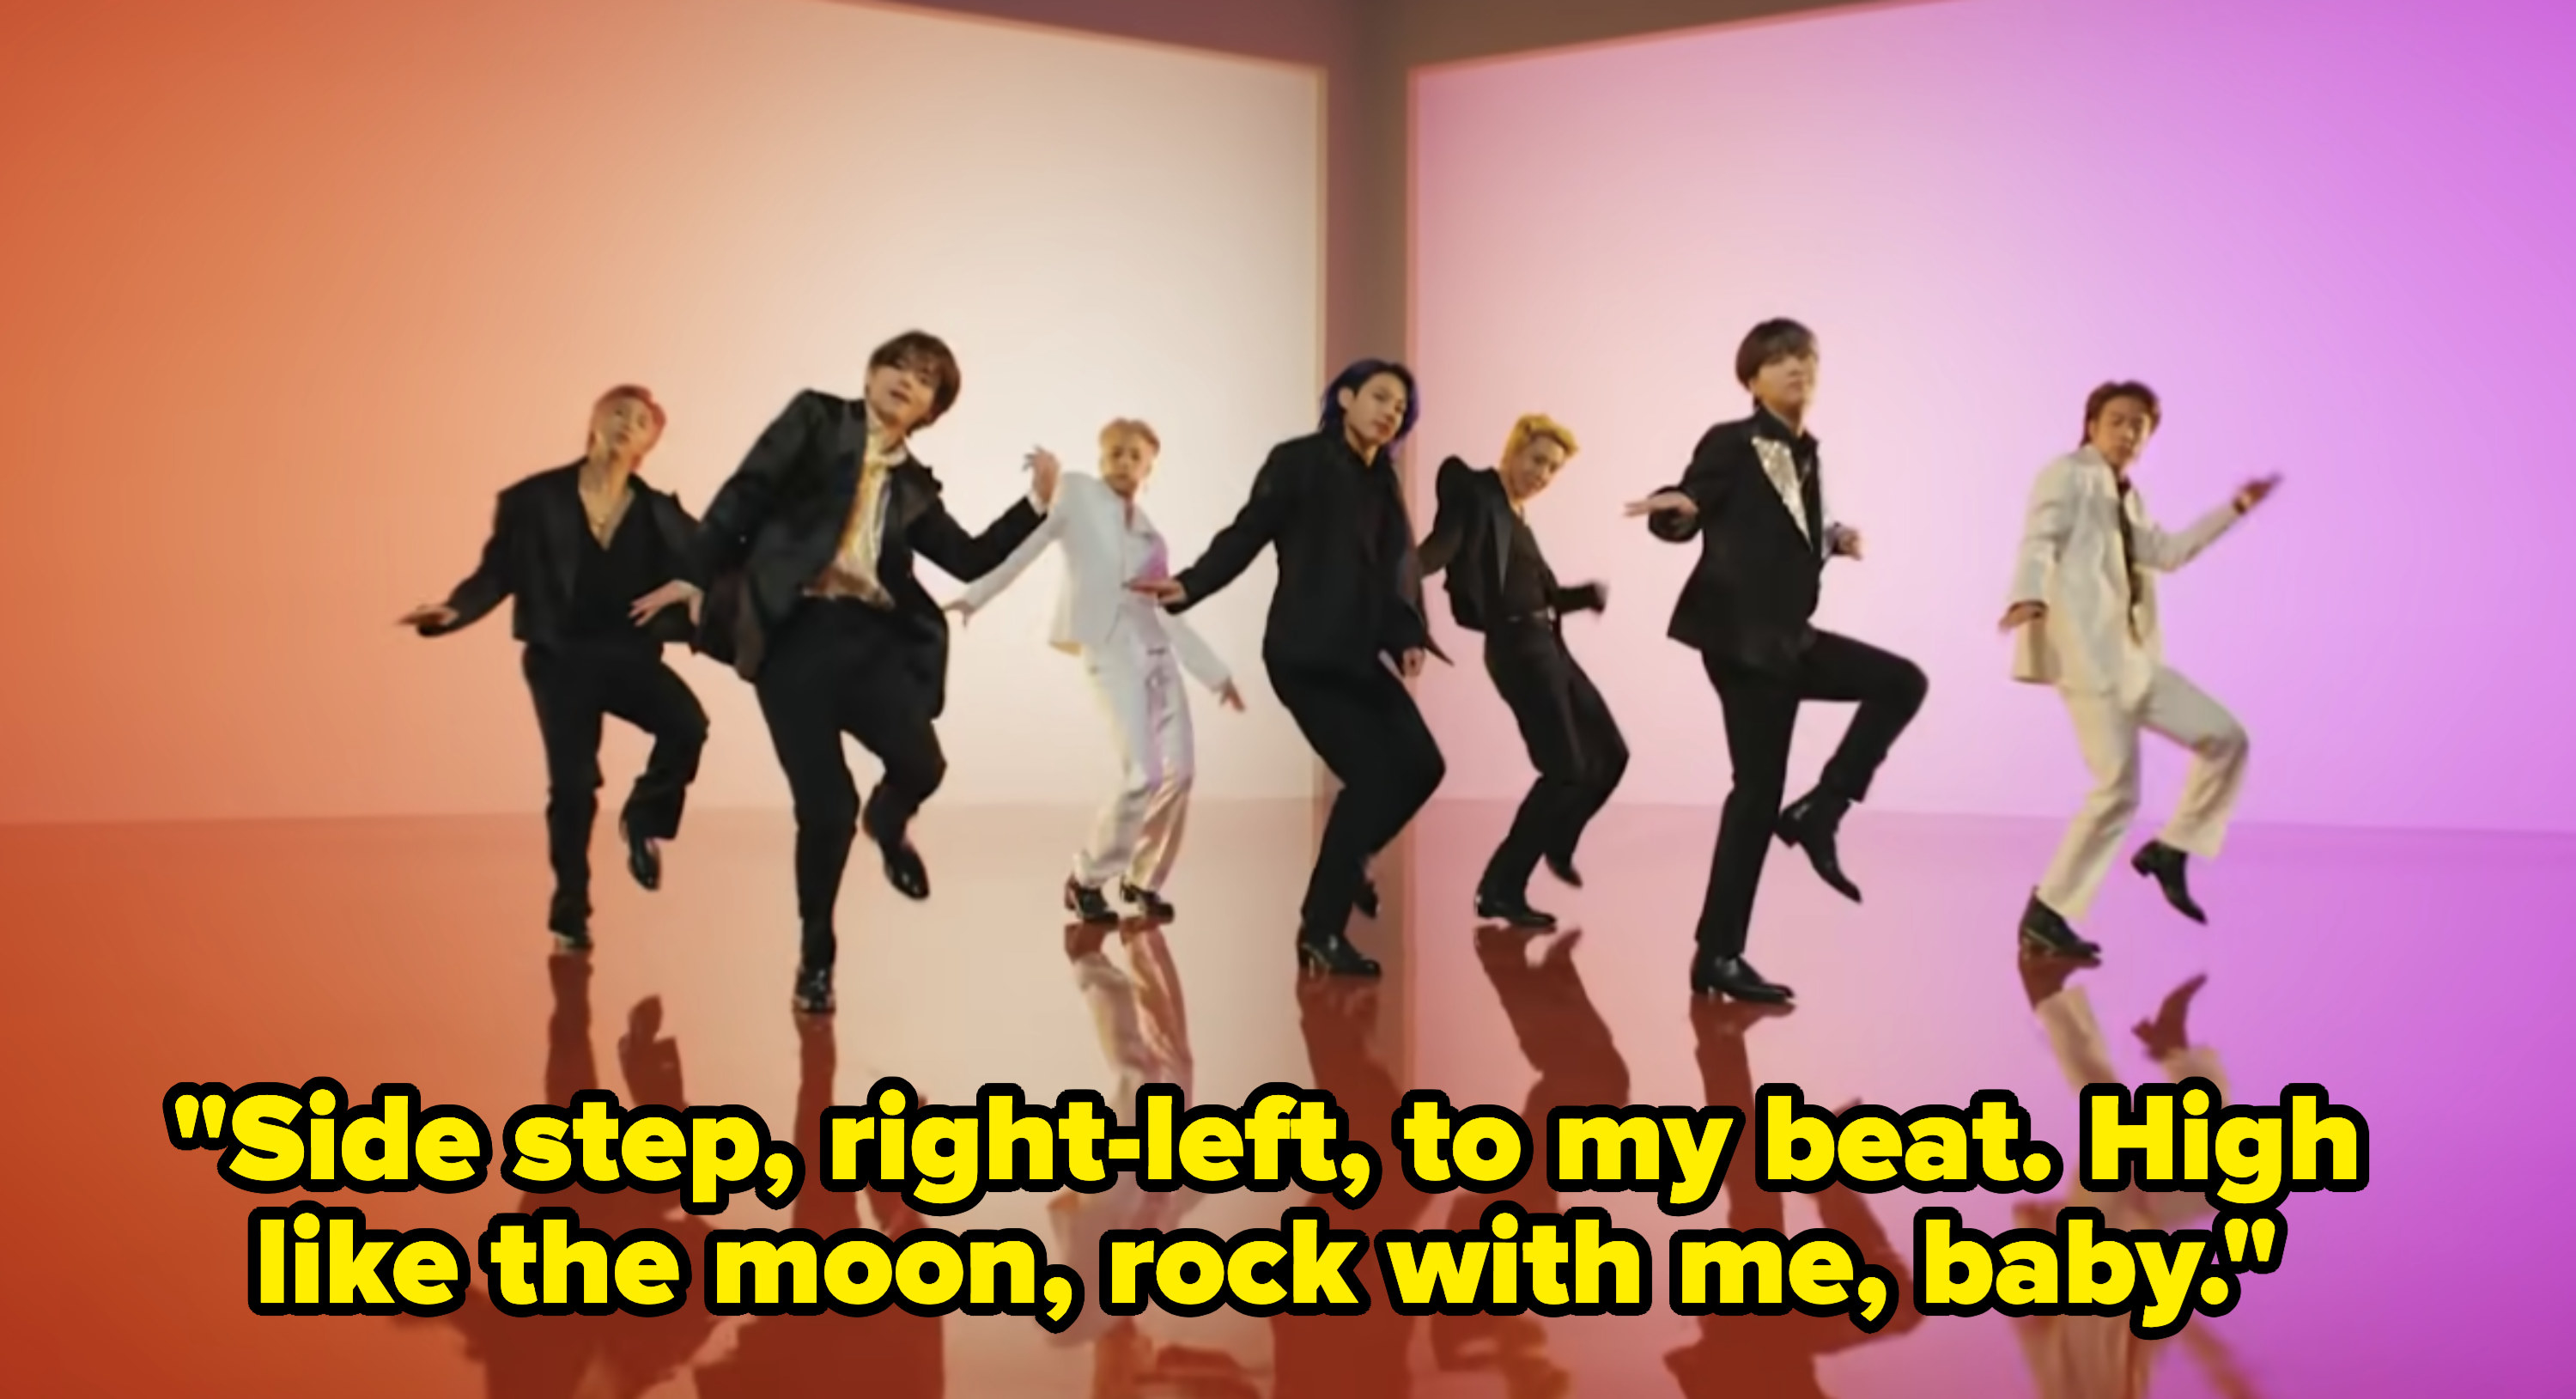 BTS sings &quot;Side step, right-left, to my beat. High like the moon, rock with me, baby&quot;